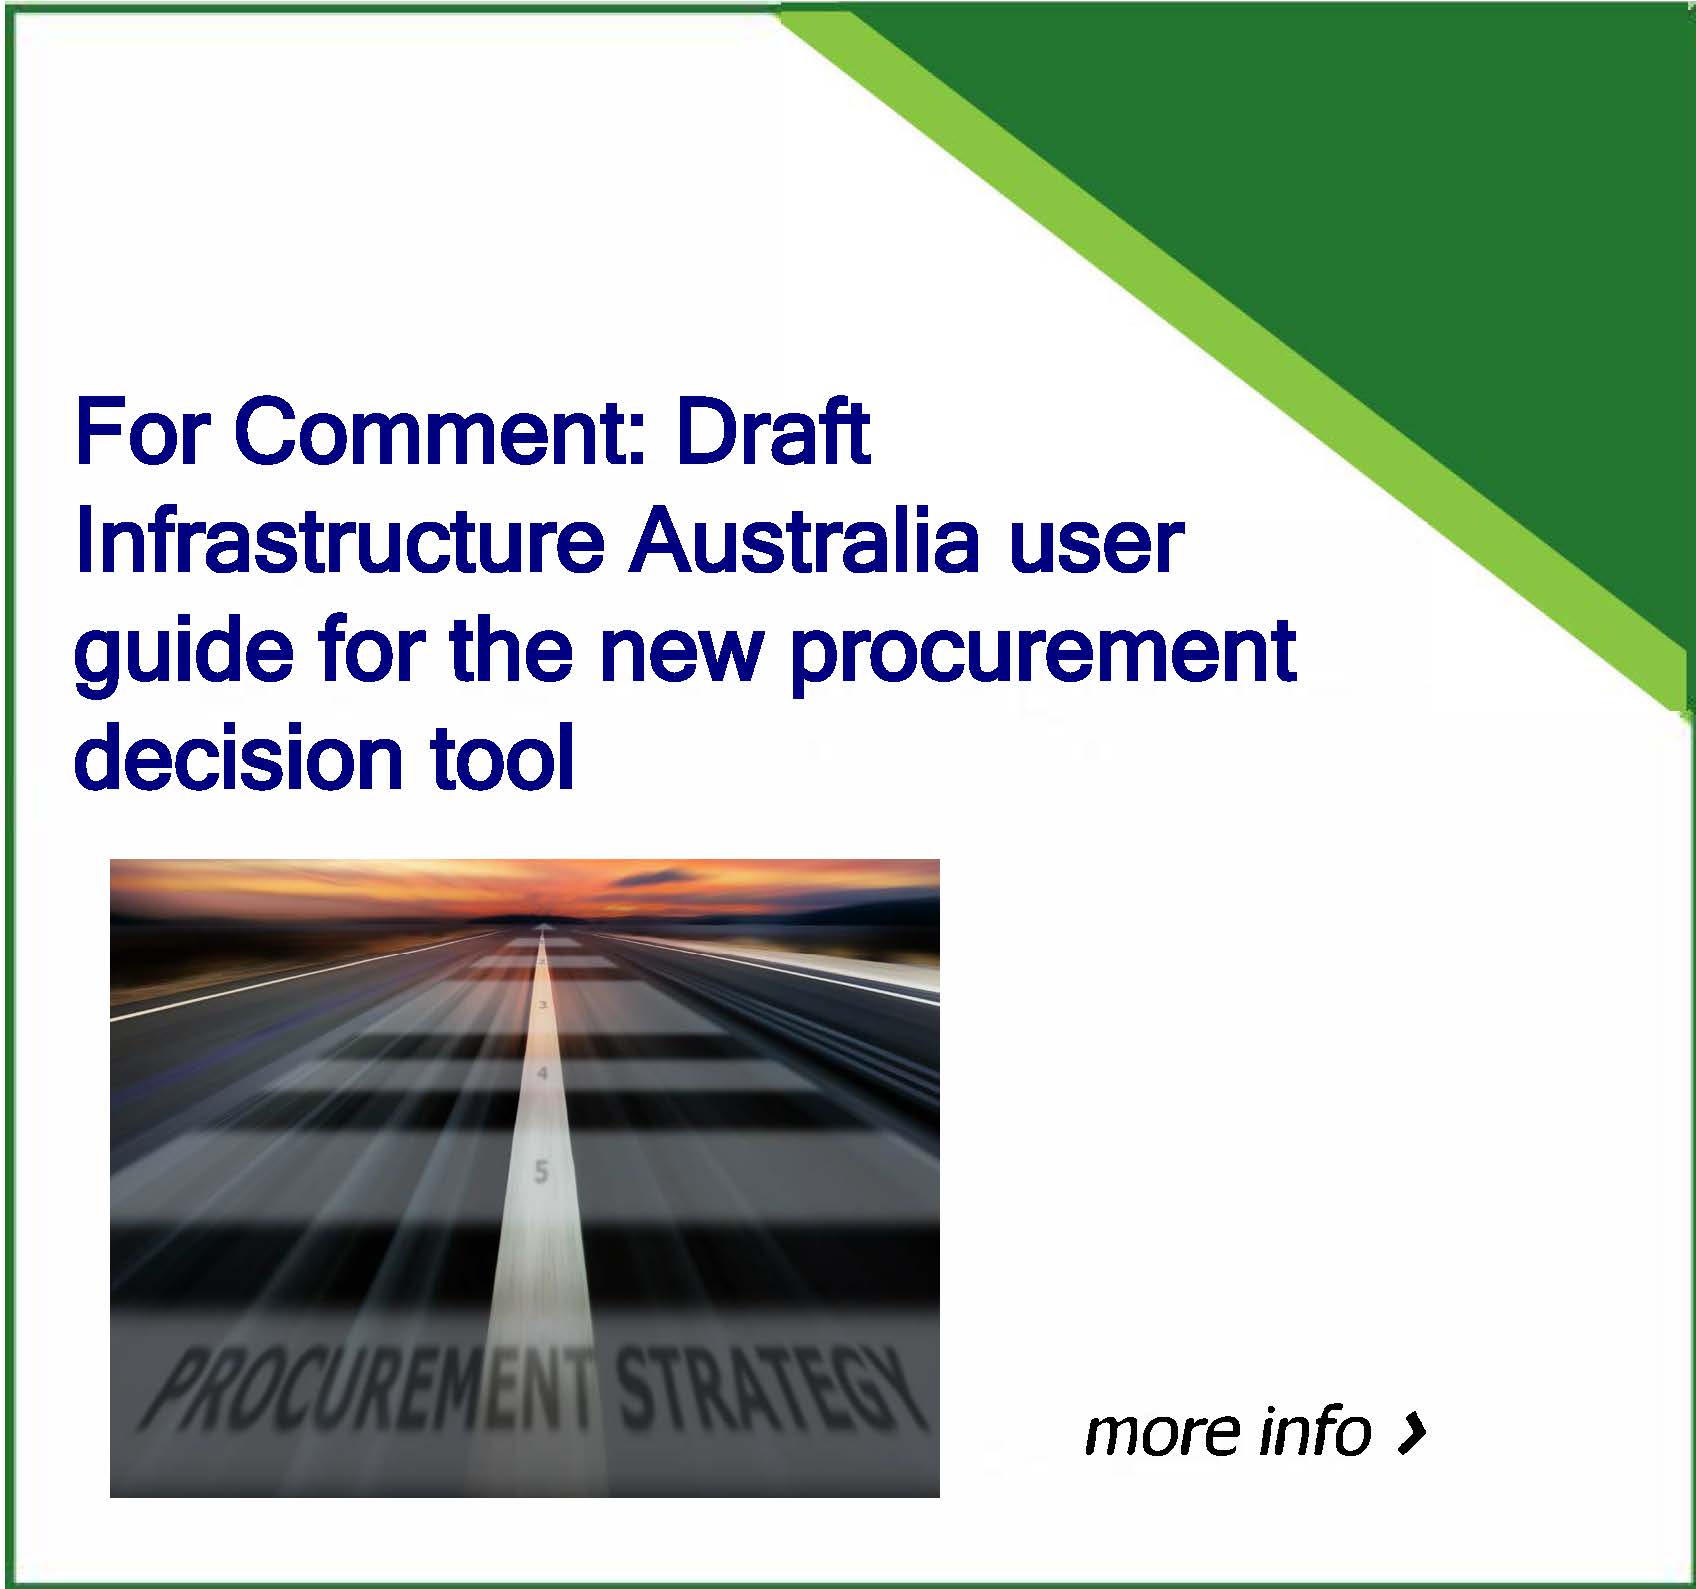 For Comment: Draft Infrastructure Australia user guide for the new procurement decision tool